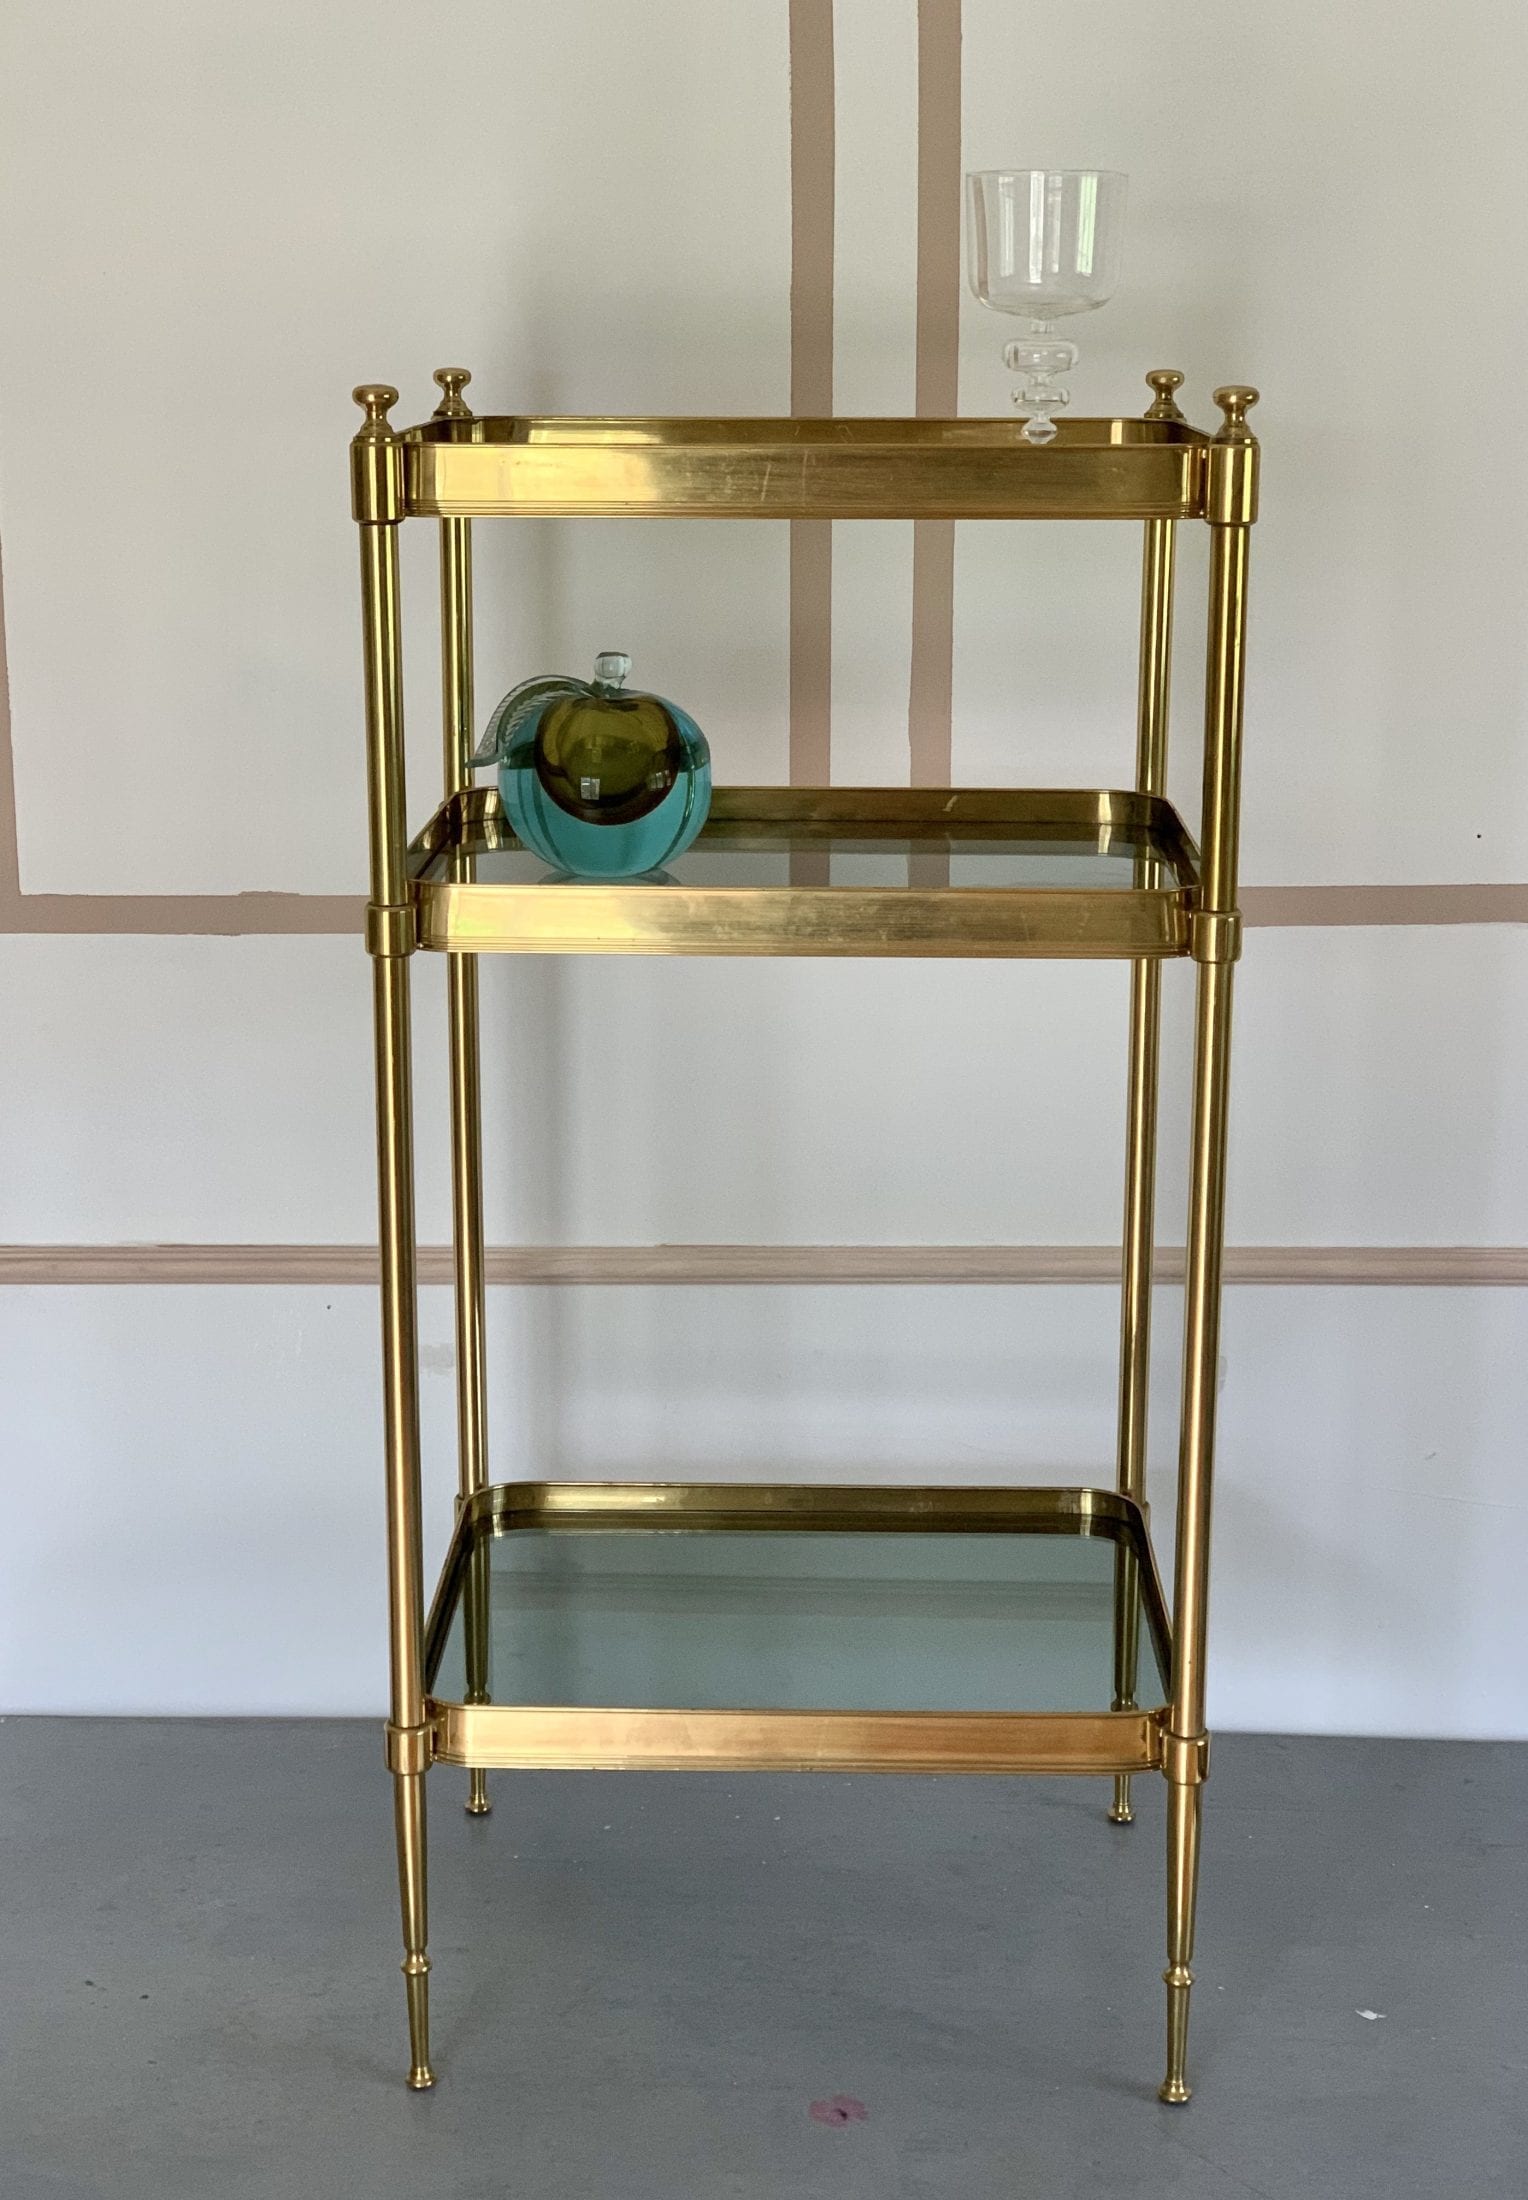 https://www.theoscarcollective.co.uk/wp-content/uploads/2020/03/Tall-Brass-Table-.jpg